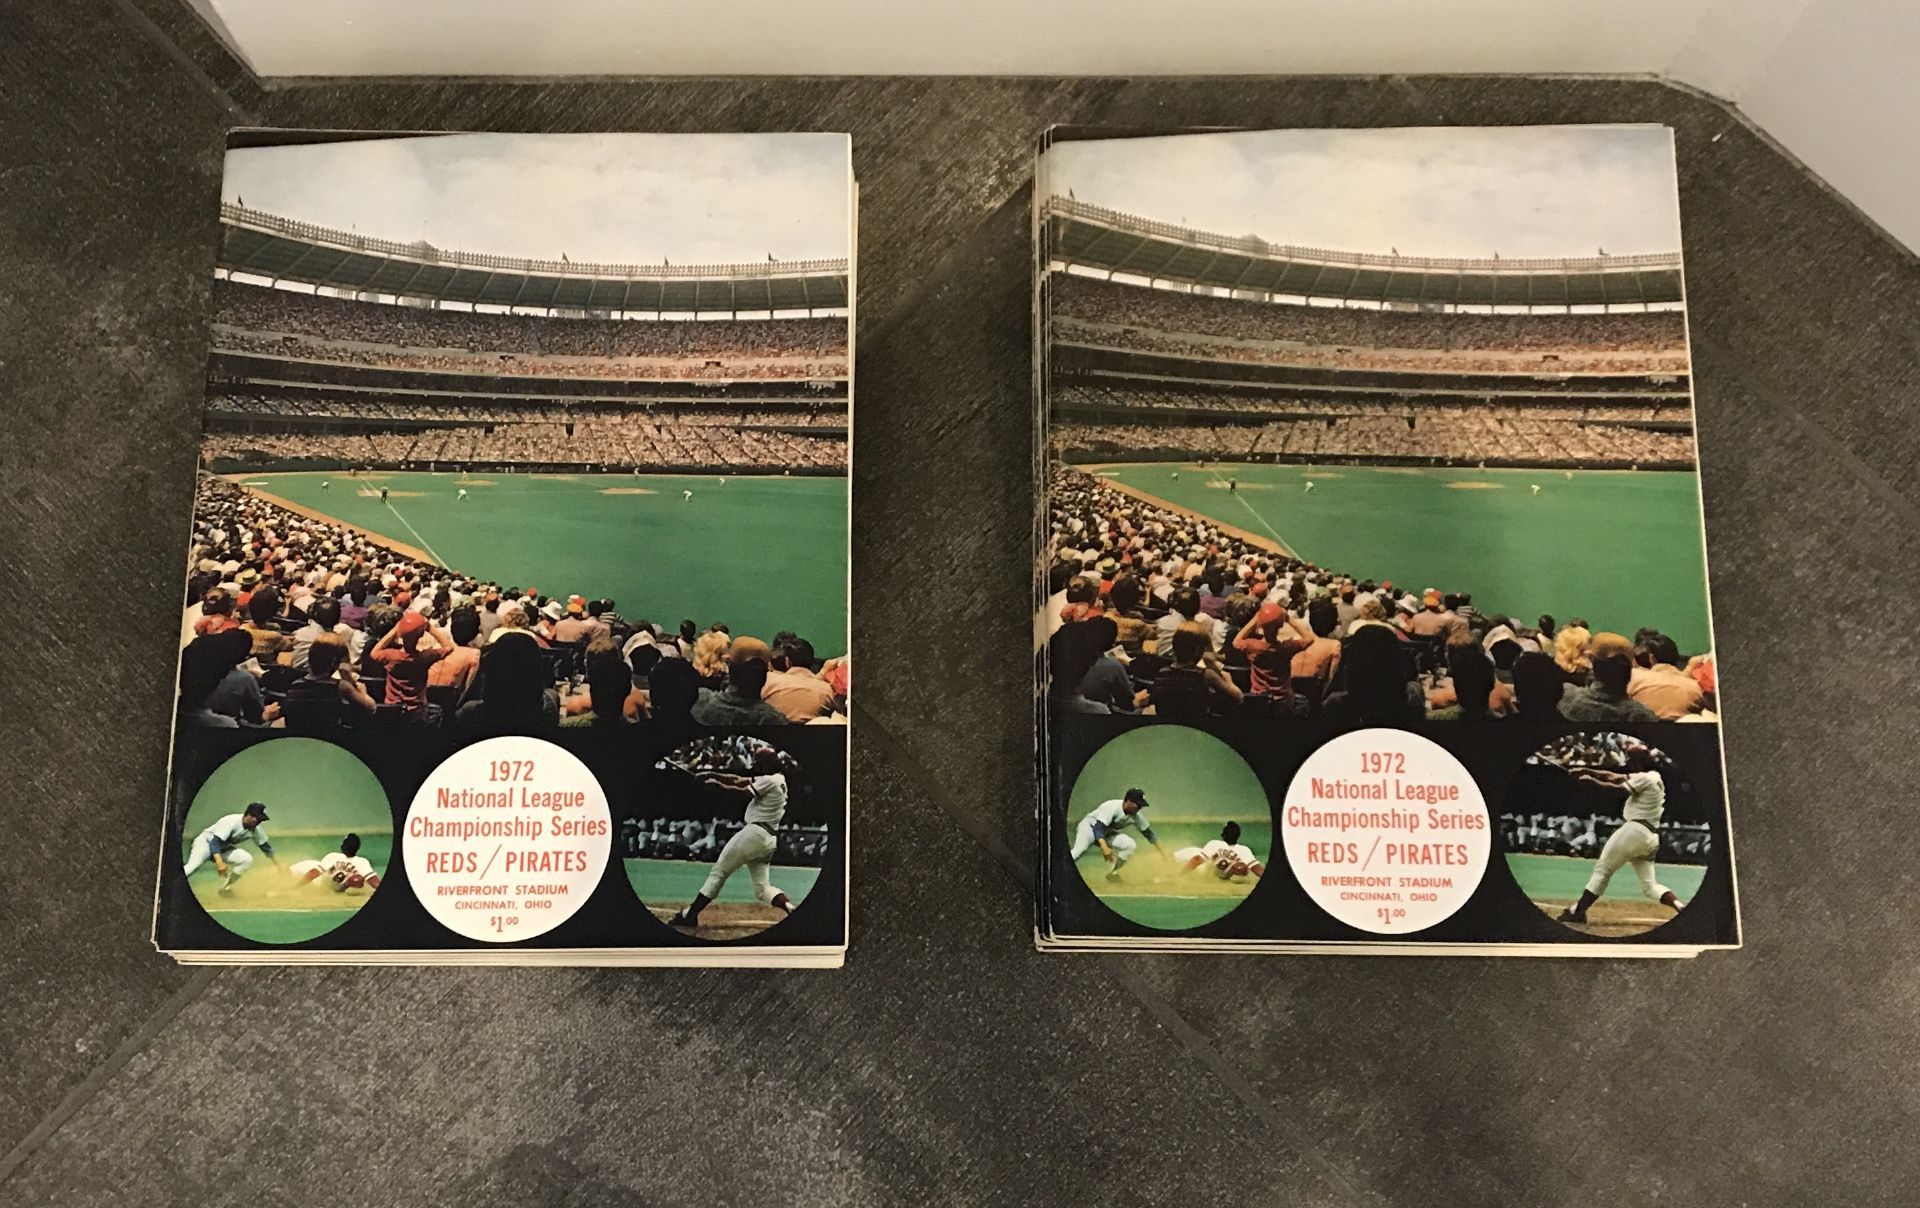 LOT OF 1972 NATIONAL LEAGUE CHAMPIONSHIP SERIES REDS / PIRATES BOOKLETS